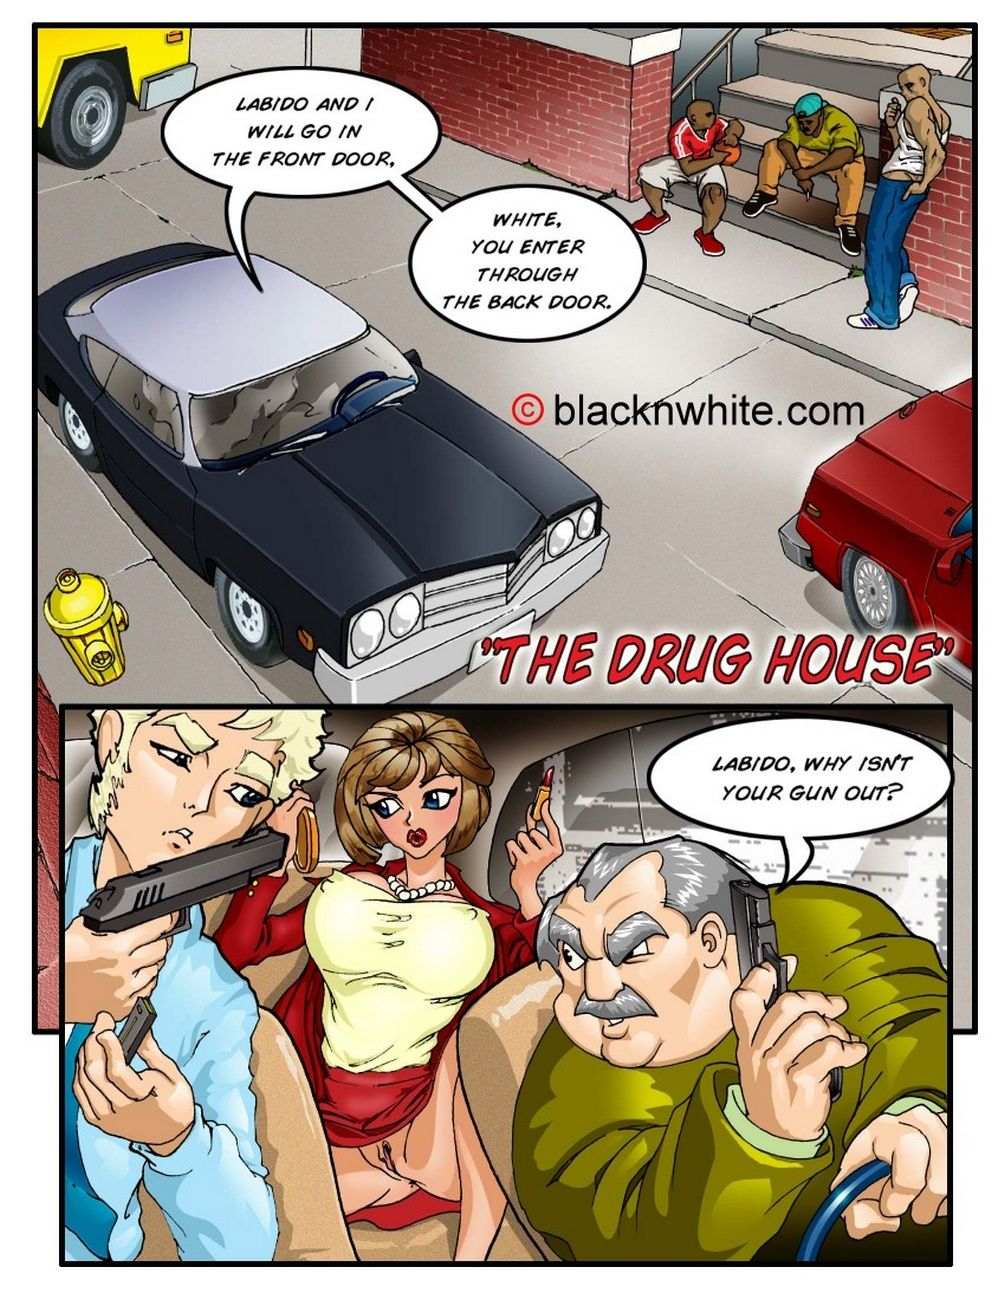 White Cops, Black Cocks 1 - The Drug House page 2